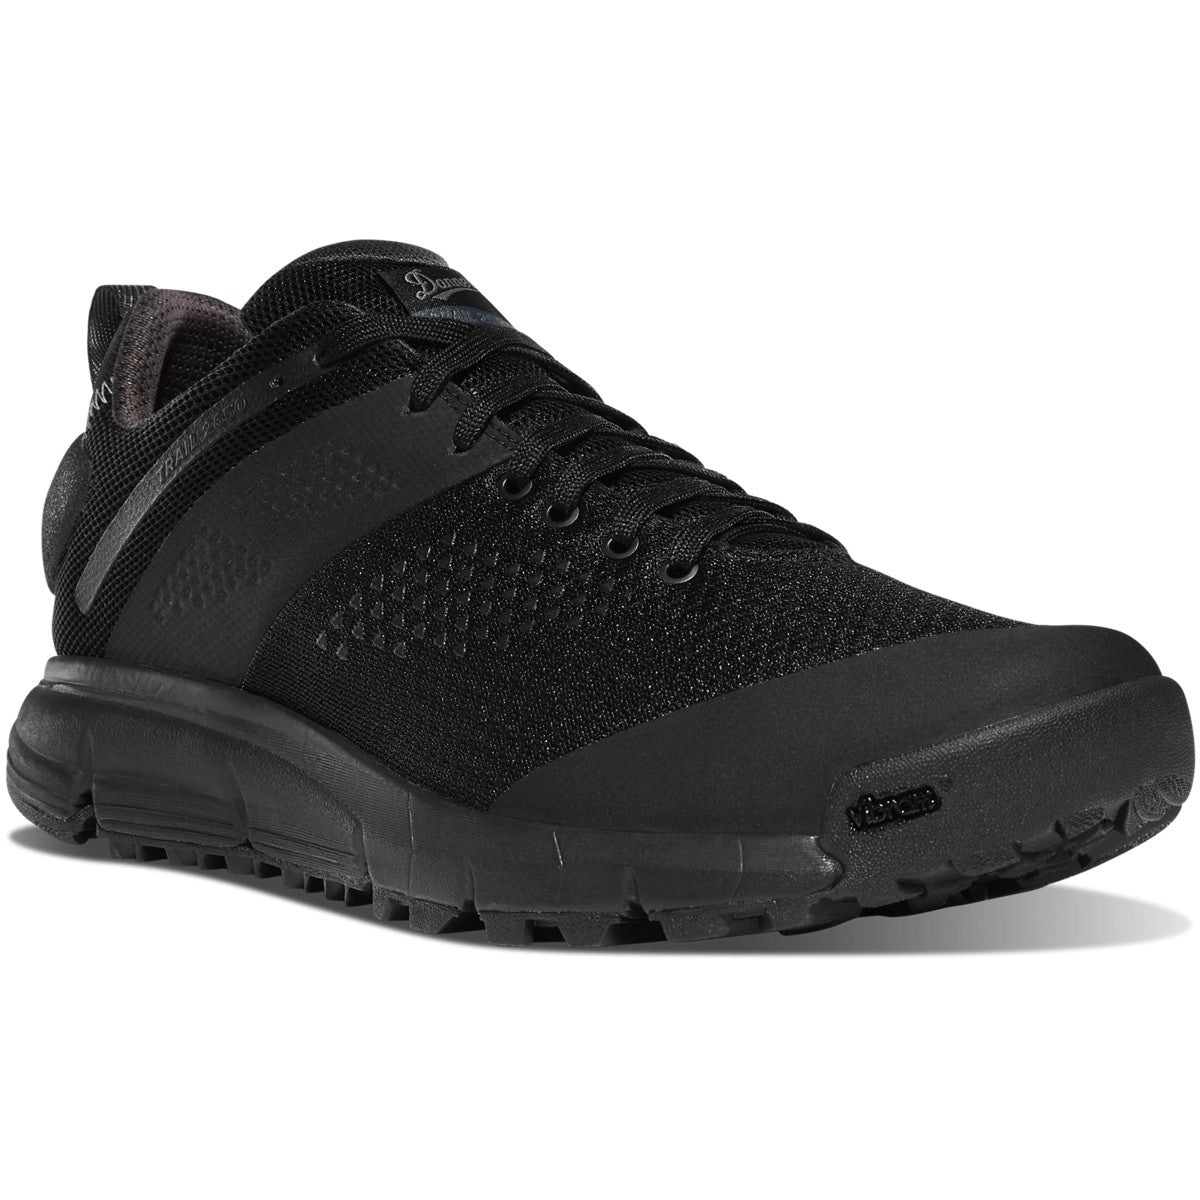 Men's Danner Trail 2650 Mesh 3" Lifestyle Shoe in Black Shadow from the front